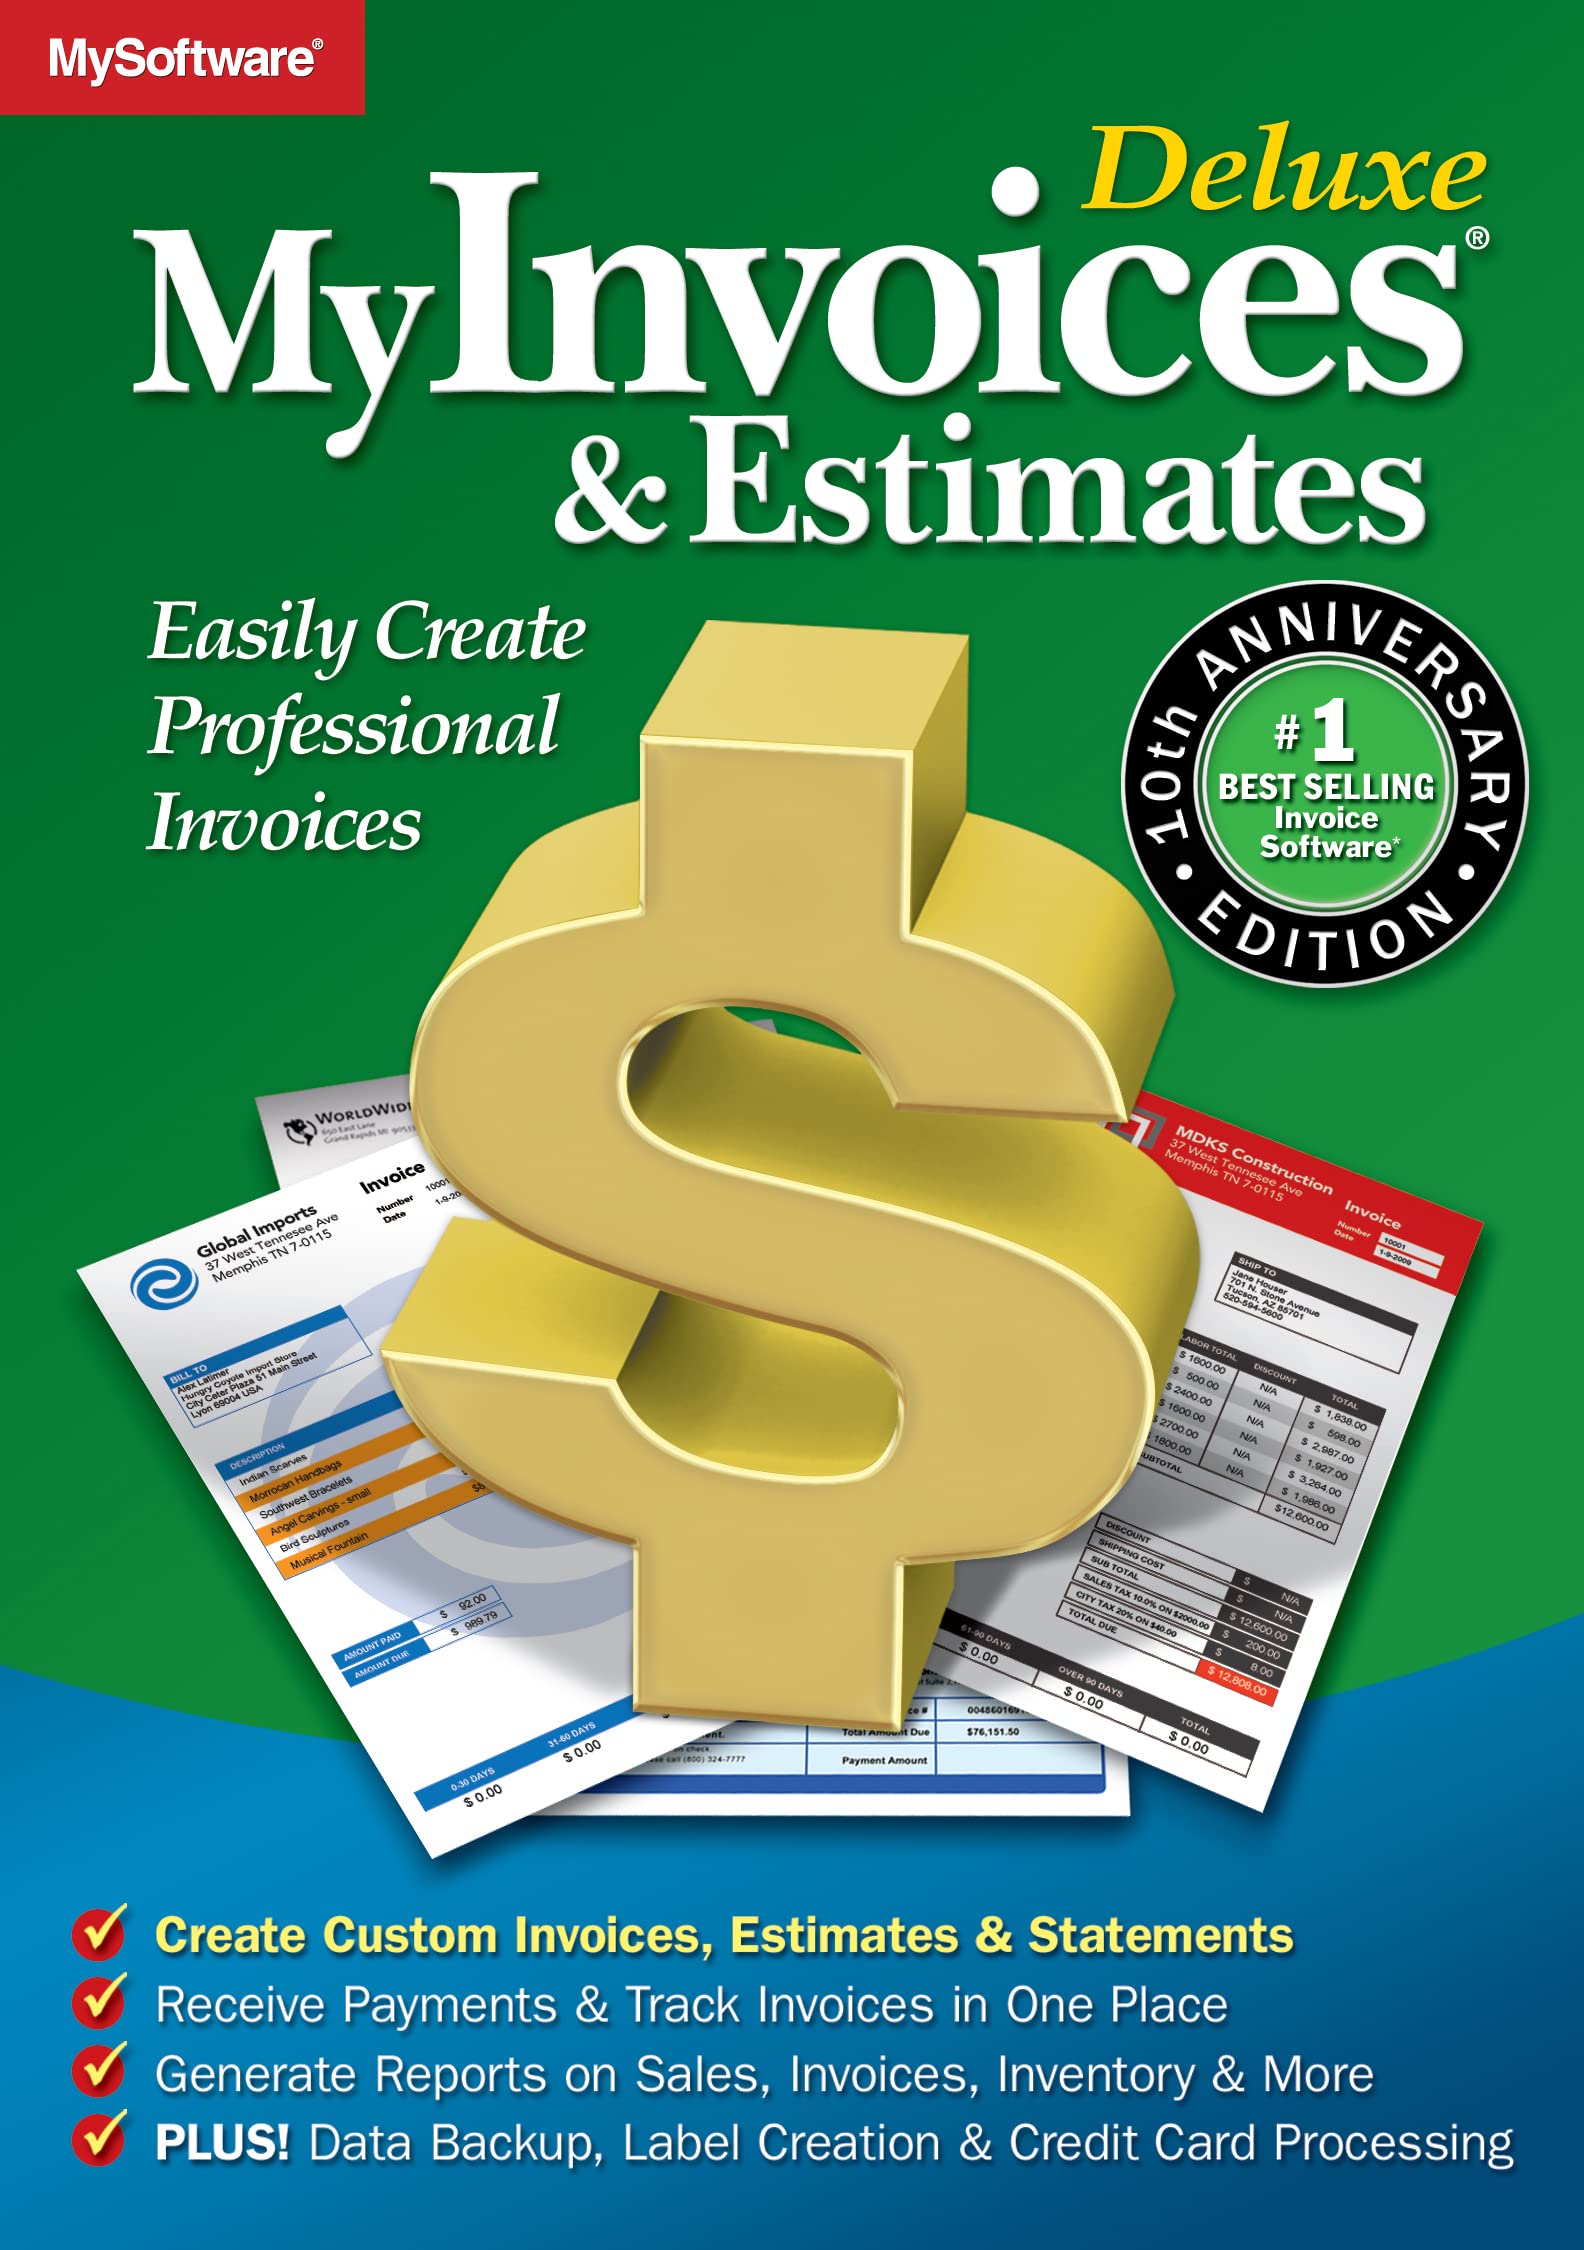 MyInvoices and Estimates Deluxe 10 Manage Billing and Cash Collection